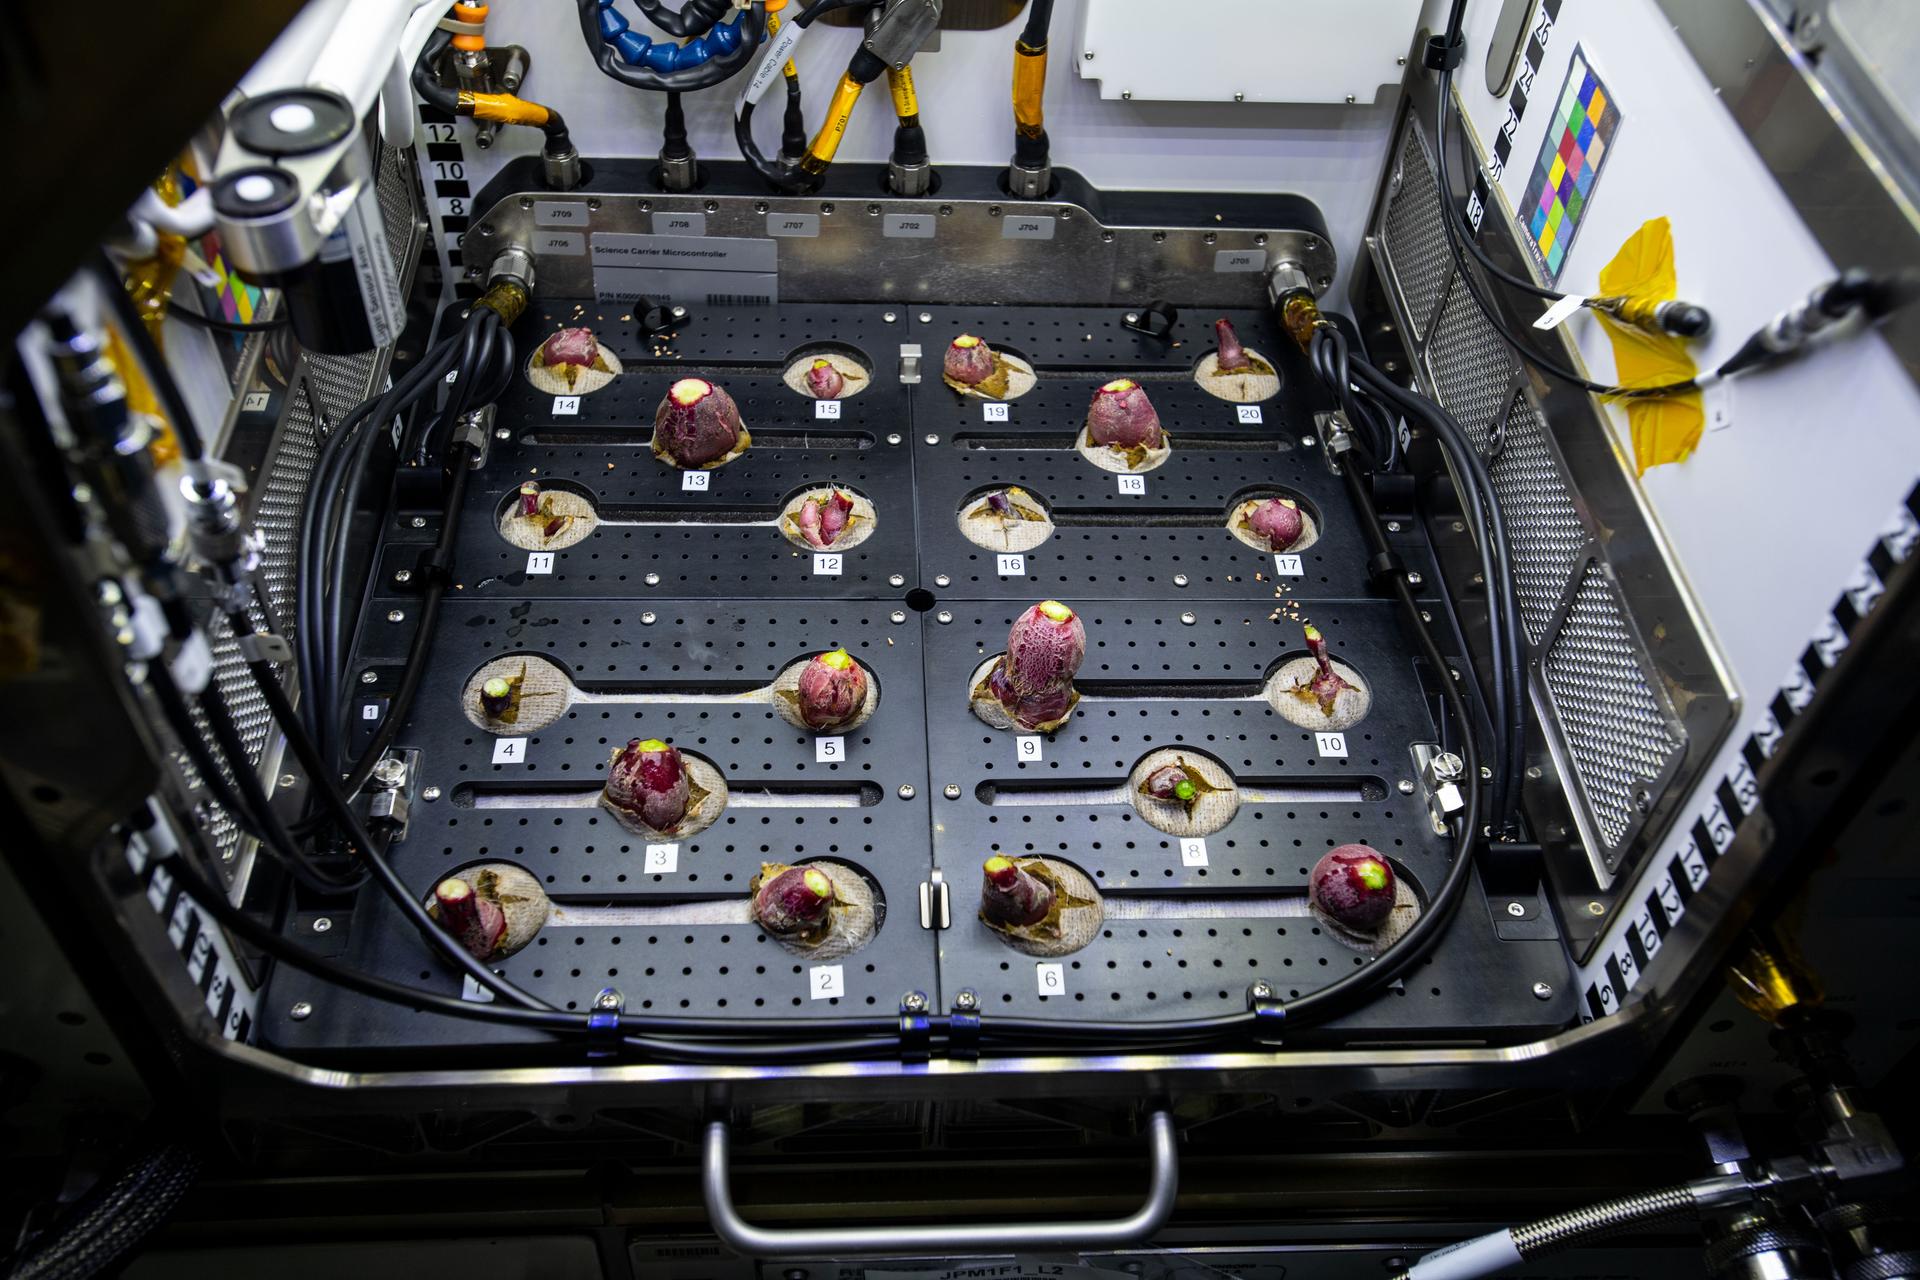 Photo documentation of radishes growing in the Advanced Plant Habitat on the International Space Station.